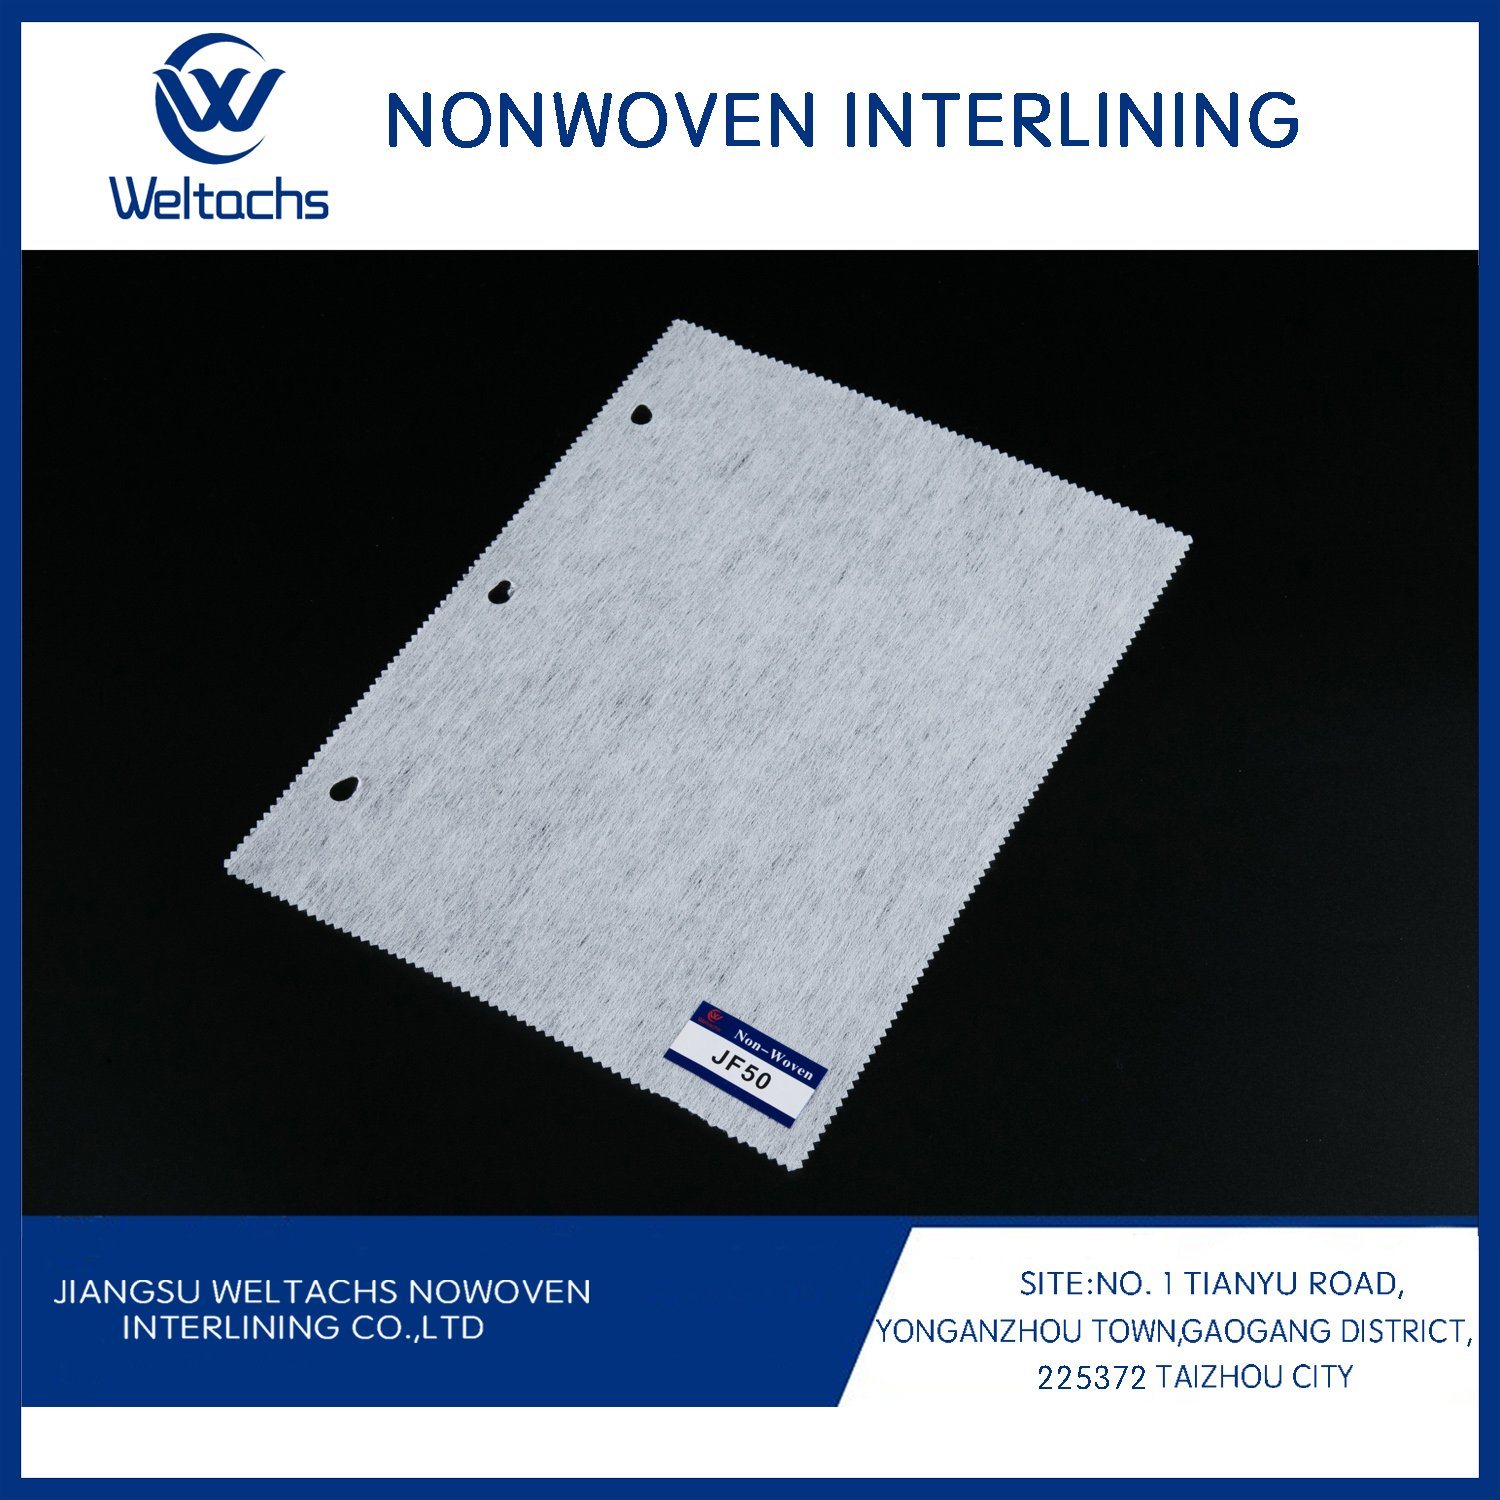 Nonwoven Gum Stay Embroidery Wendler Interlining 1025hf